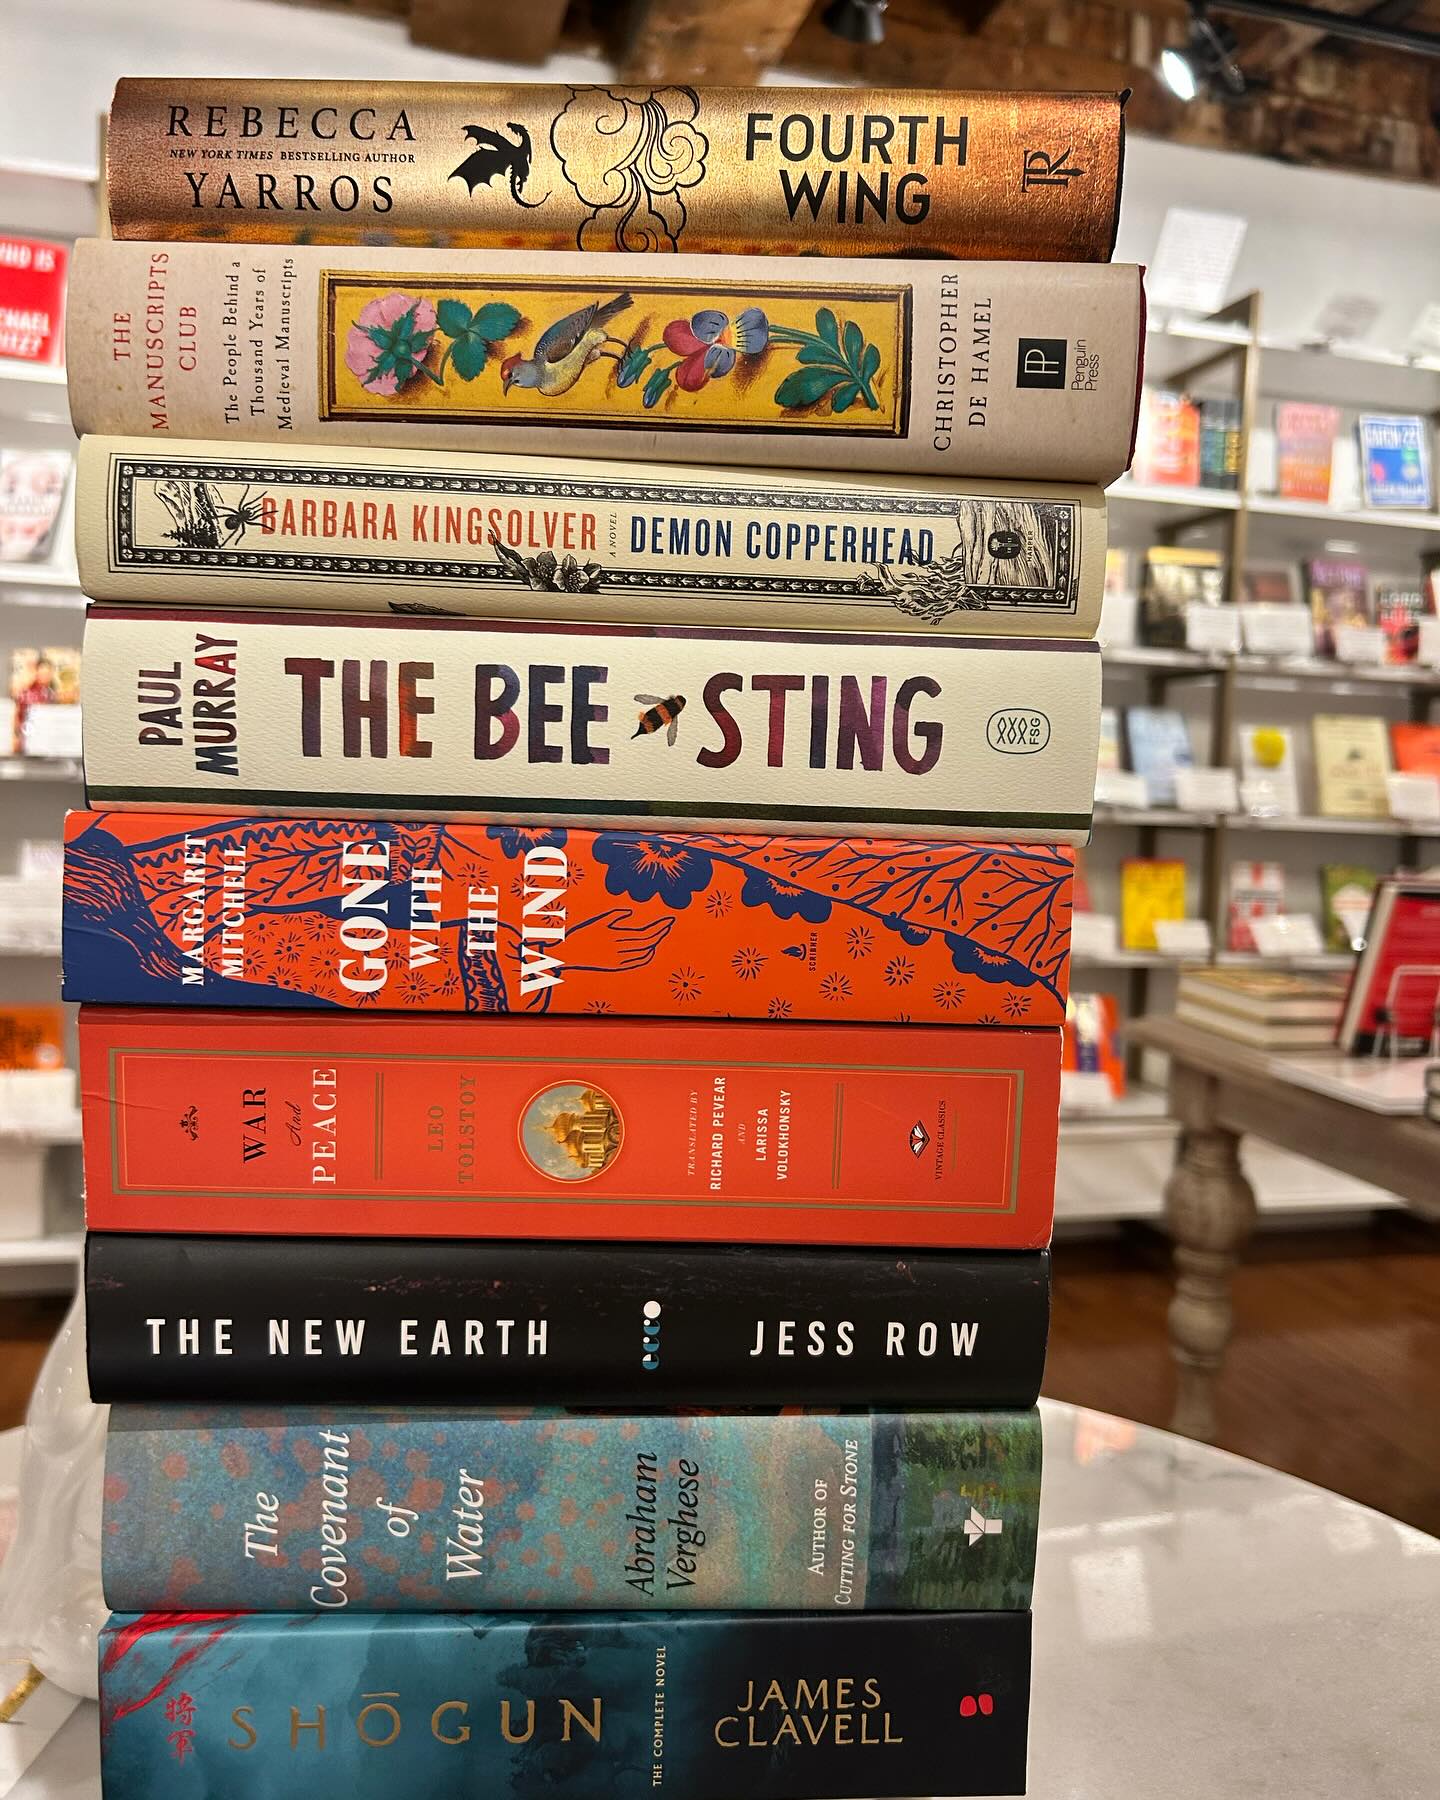 A stack of large books displayed on a table at the store: Fourth Wing, The Manuscripts Club, Demon Copperhead, The Bee Sting, Gone With the Wind, War and Peace, The New Earth, The Covenant of Winter, Shogun